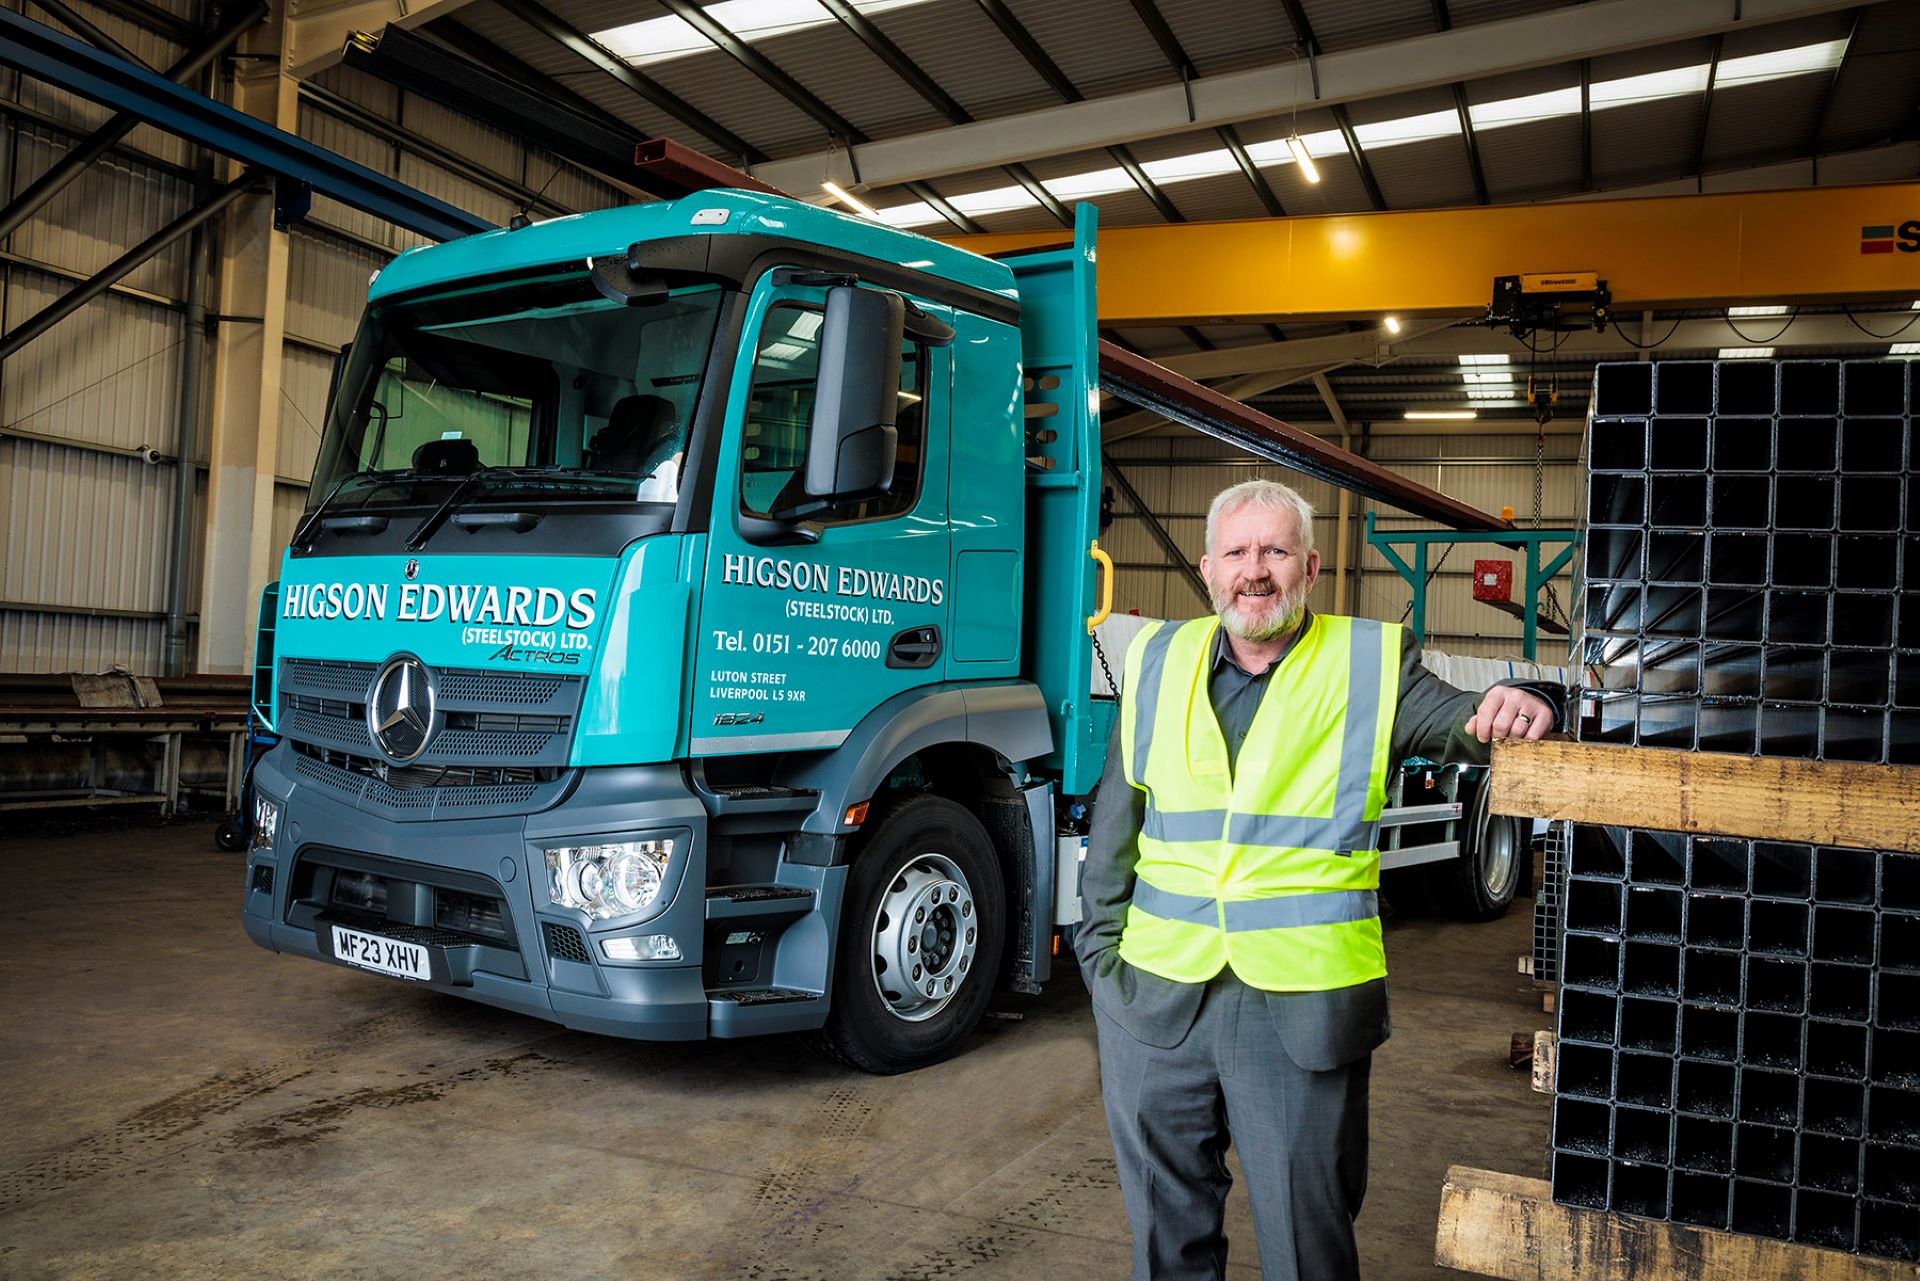 Mercedes-Benz Actros is the solid option for steel supplier Higson Edwards